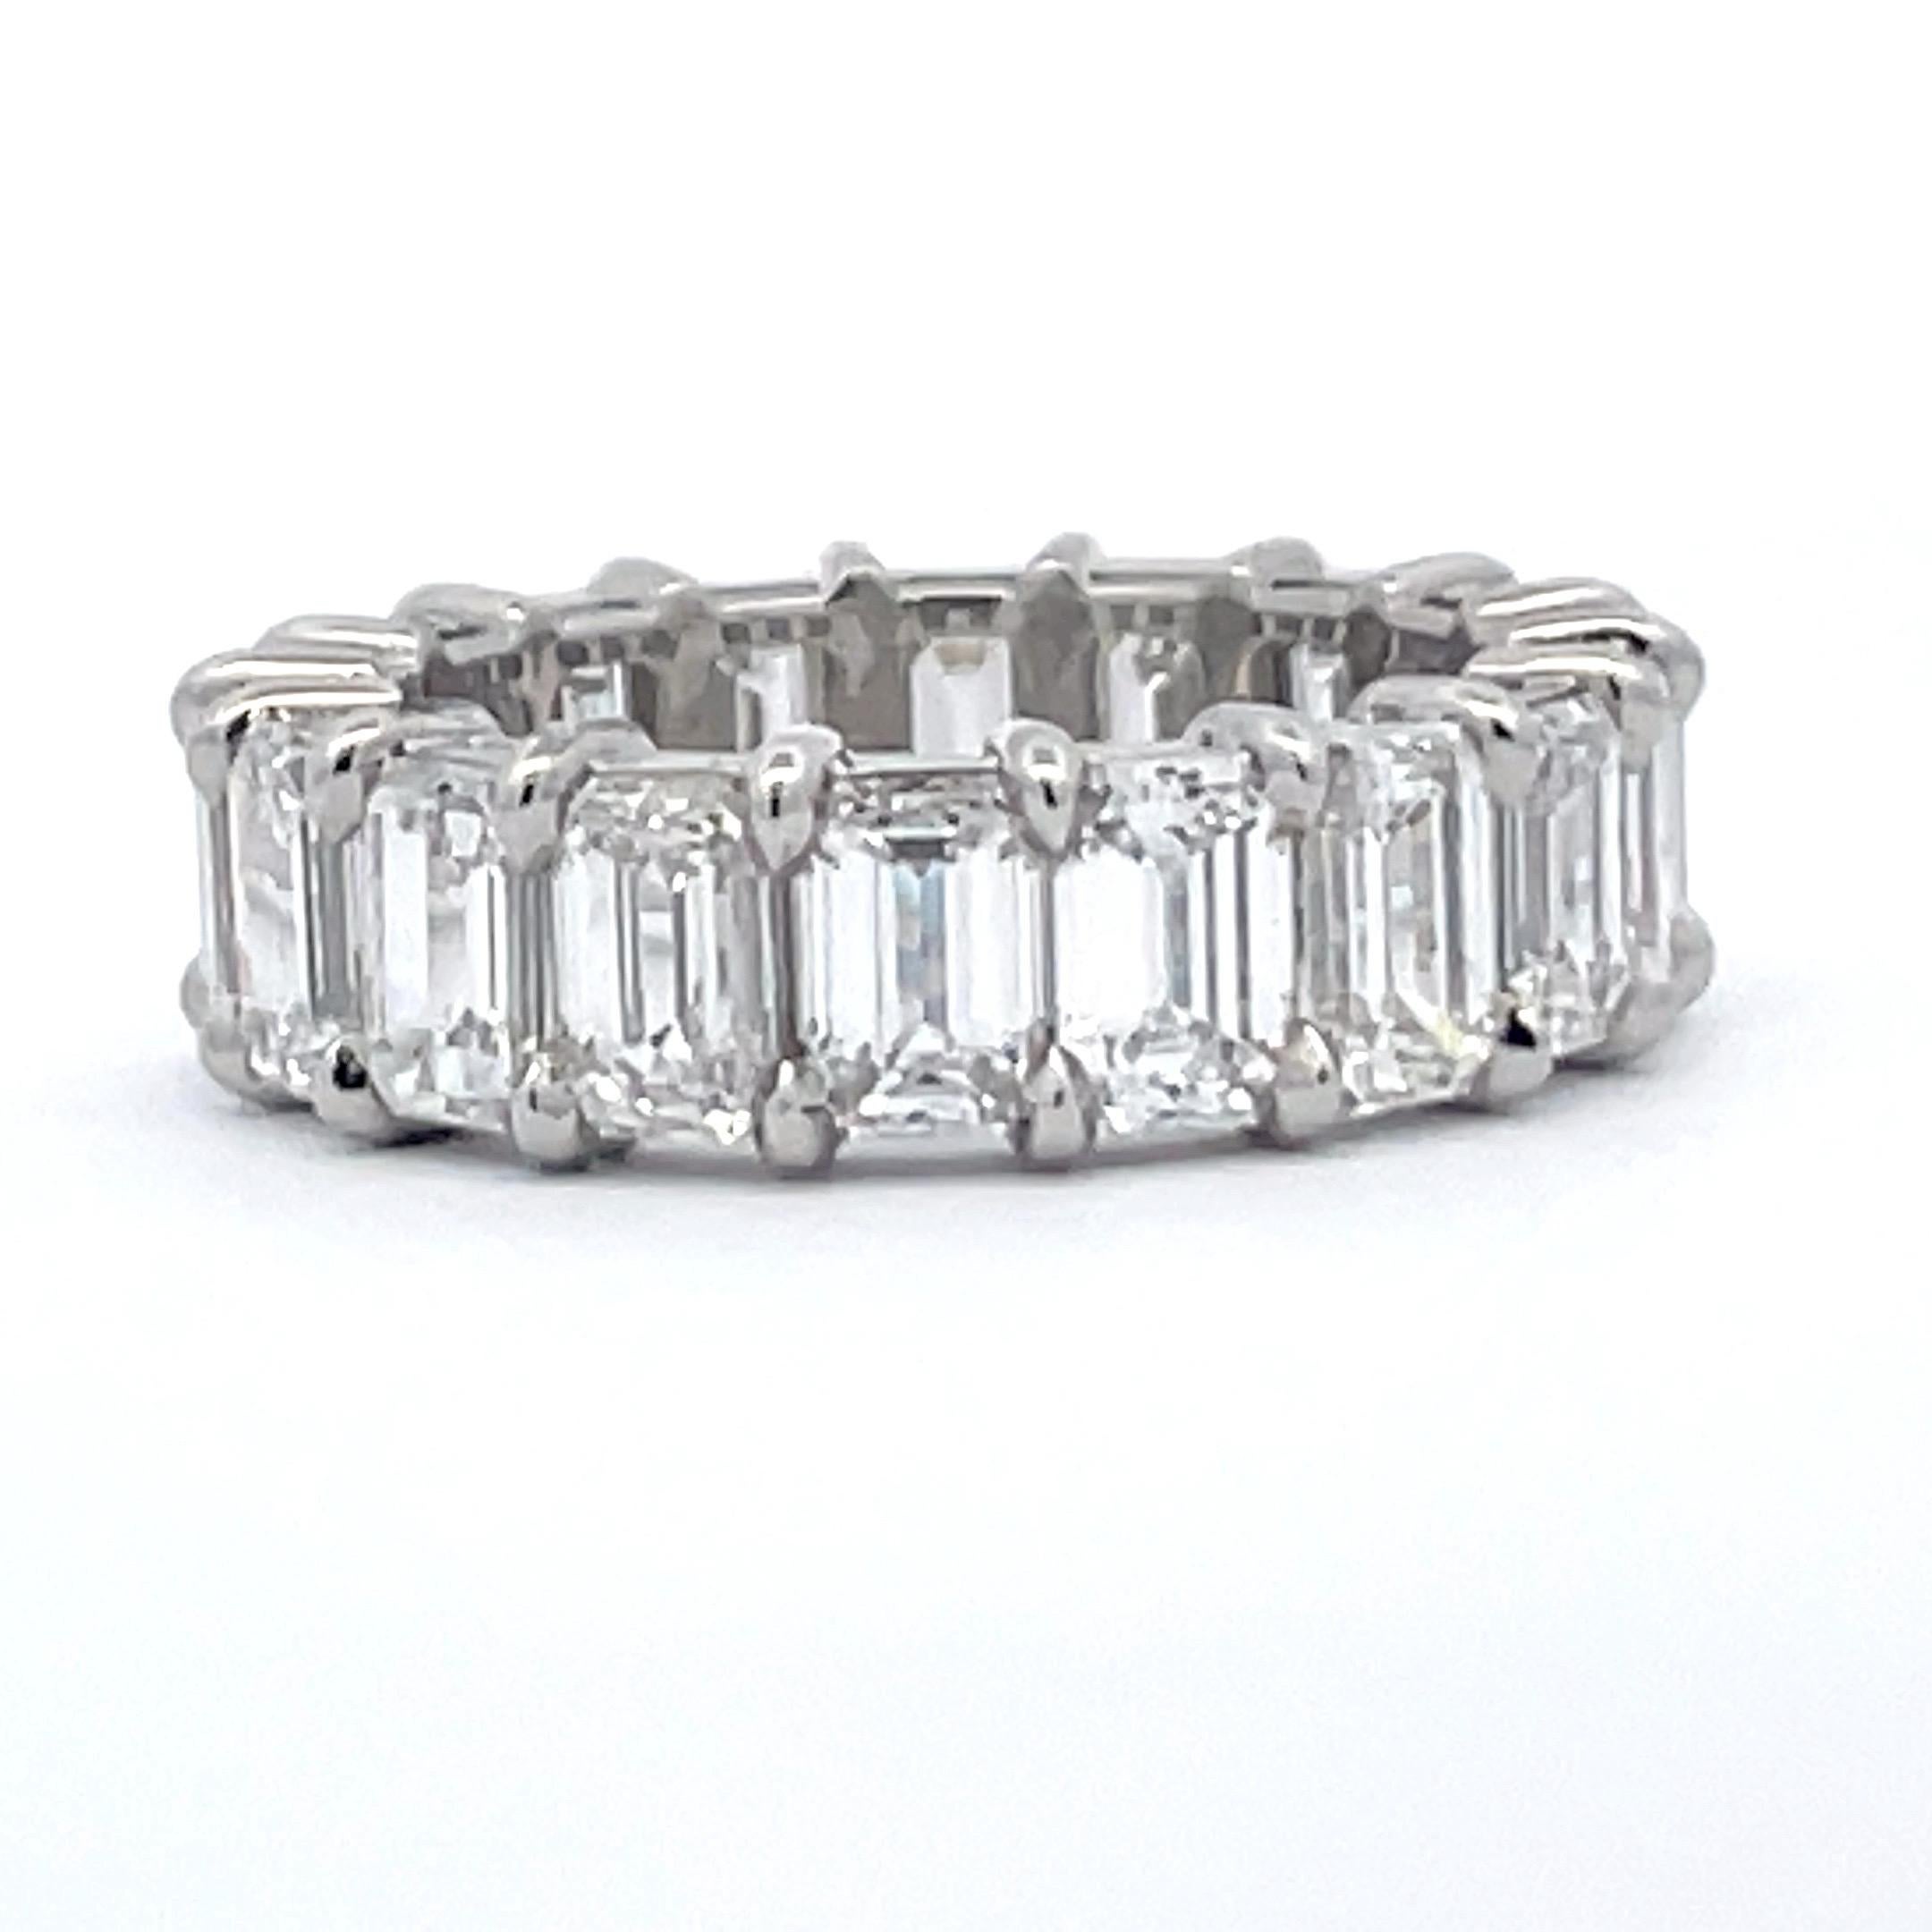 A fine Eternity Ring featuring 18 Emerald Cut Diamonds weighing 7.41 Carats, crafted in Platinum. 
Average 0.41 points Perfectly Matched!
Diamonds graded by our in house Gemologist 
Airline gallery, comfort fit!
Also available in 0.50-0.70 points,